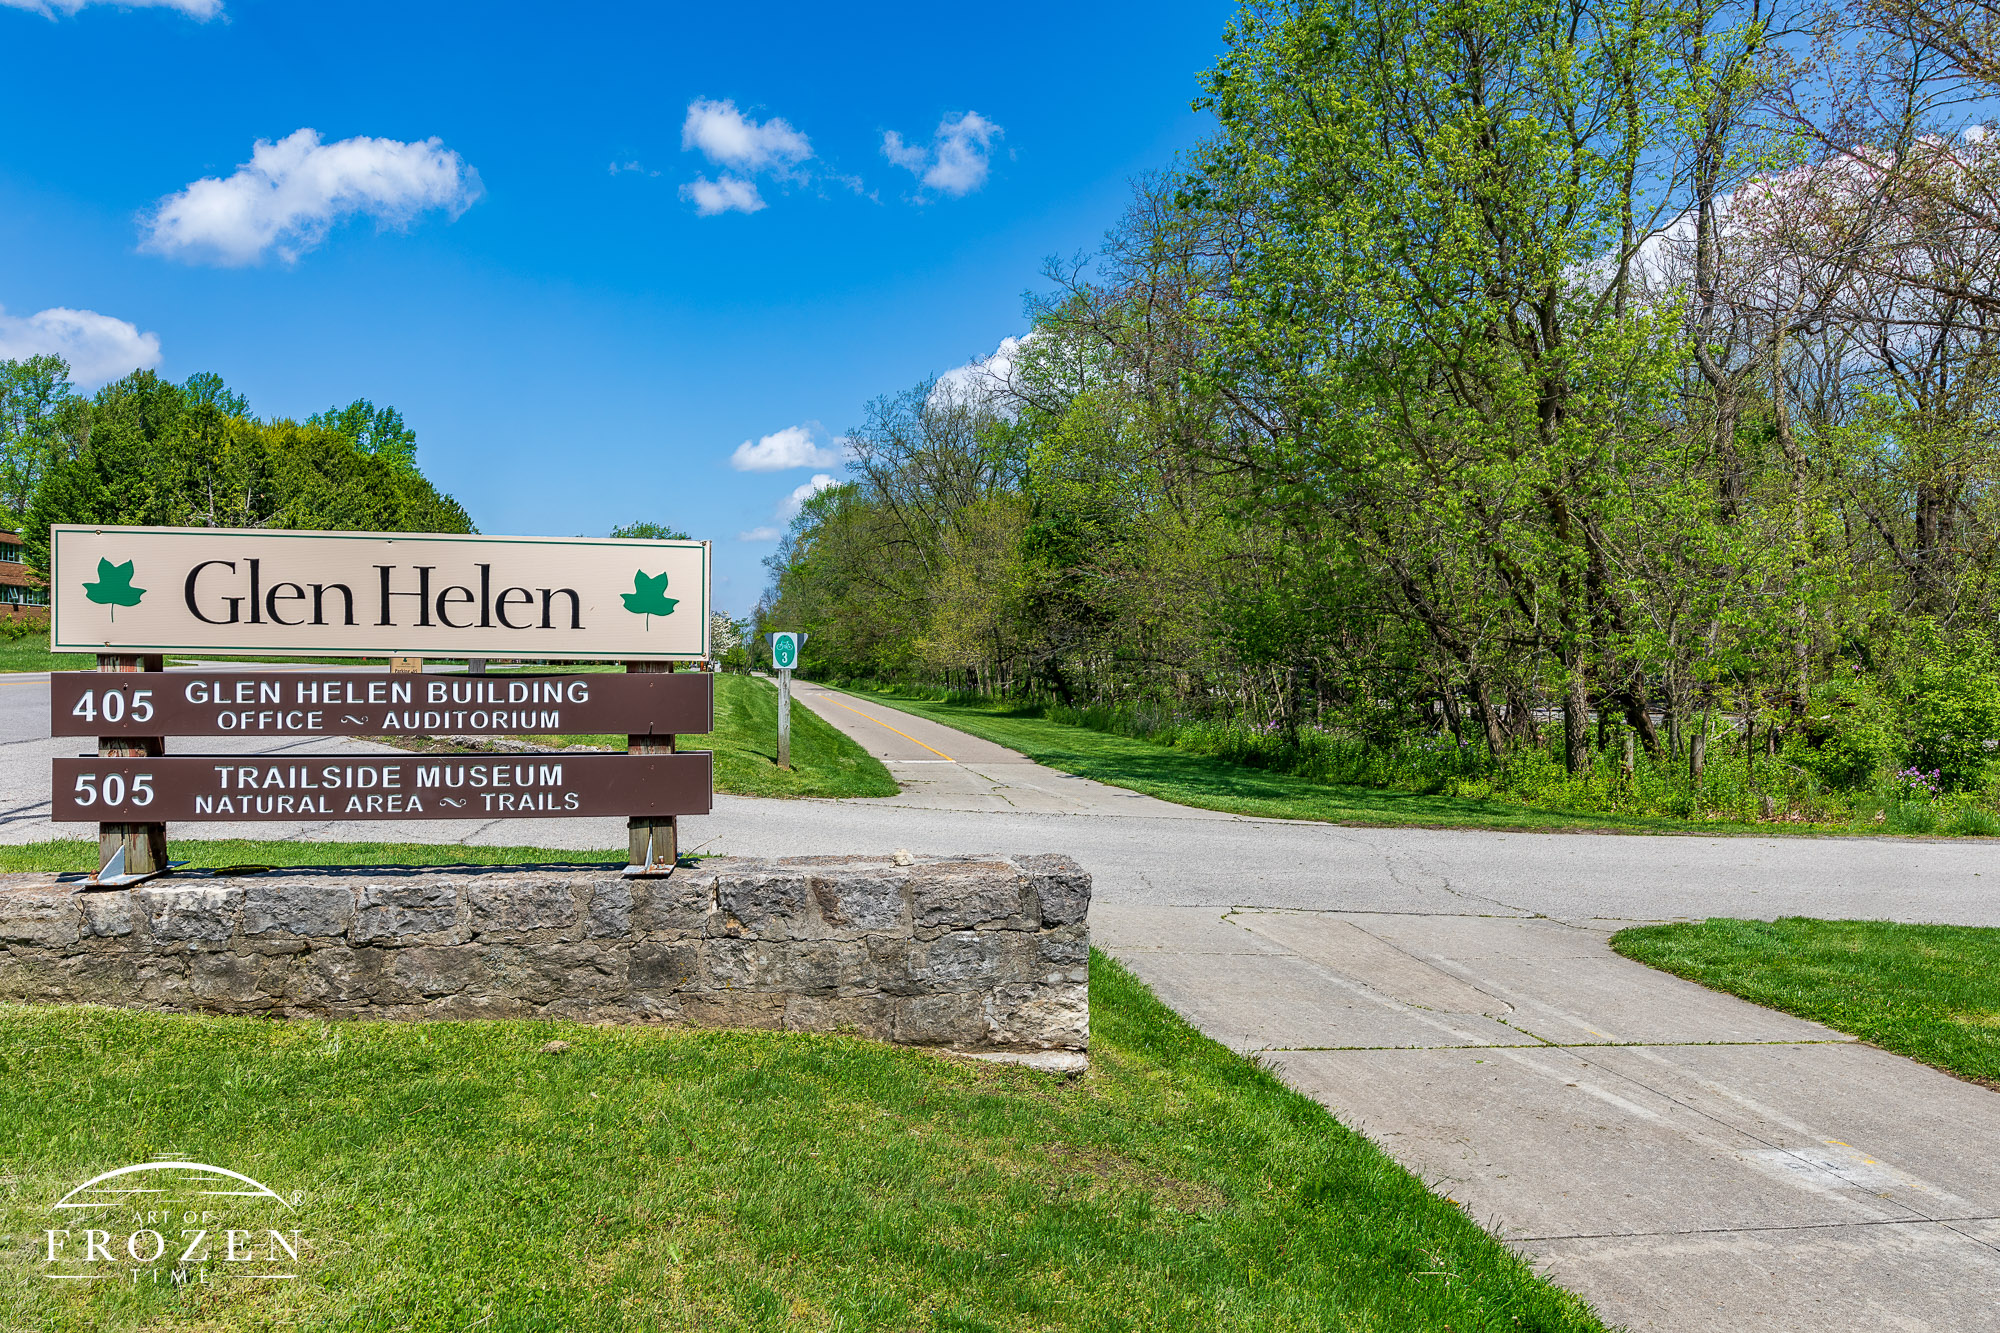 The Little Miami Scenic Trail extends past the Glen Helen Nature Preserve entrance on an early spring day.